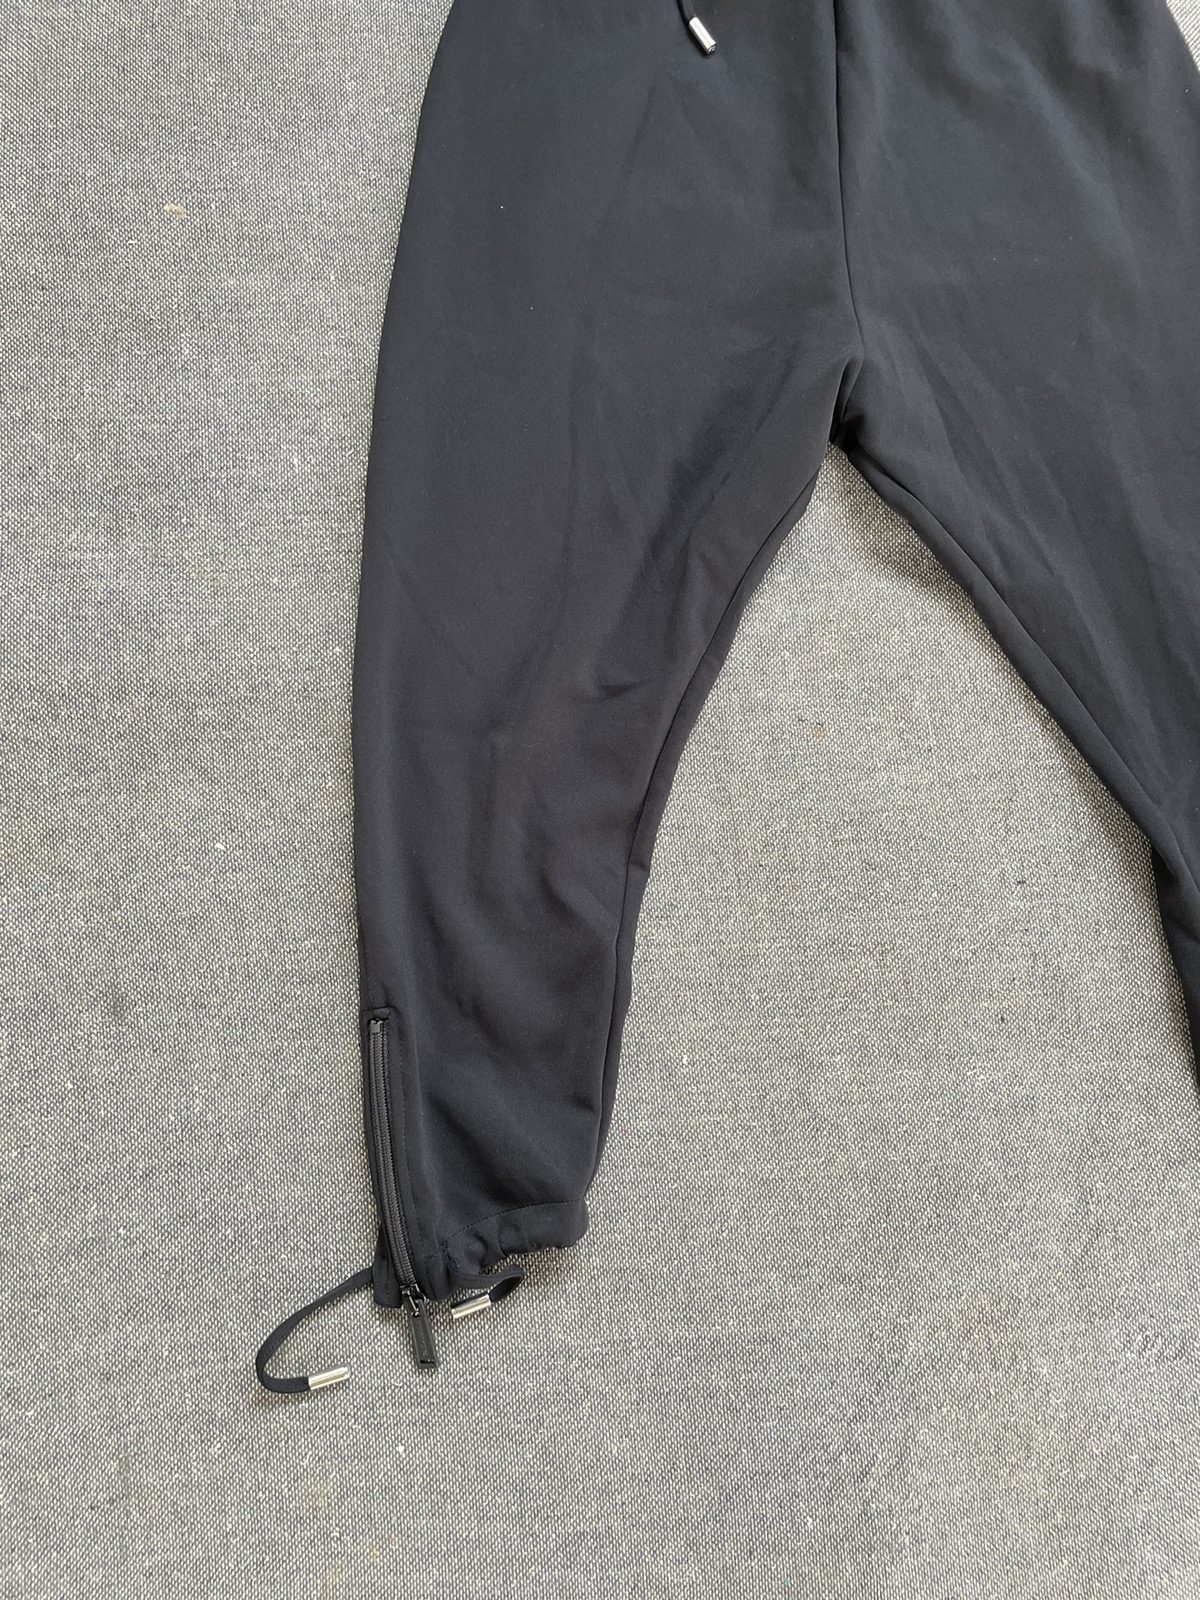 DSQUARED2 Sweatpants Like New Condition Made In Italy - 7